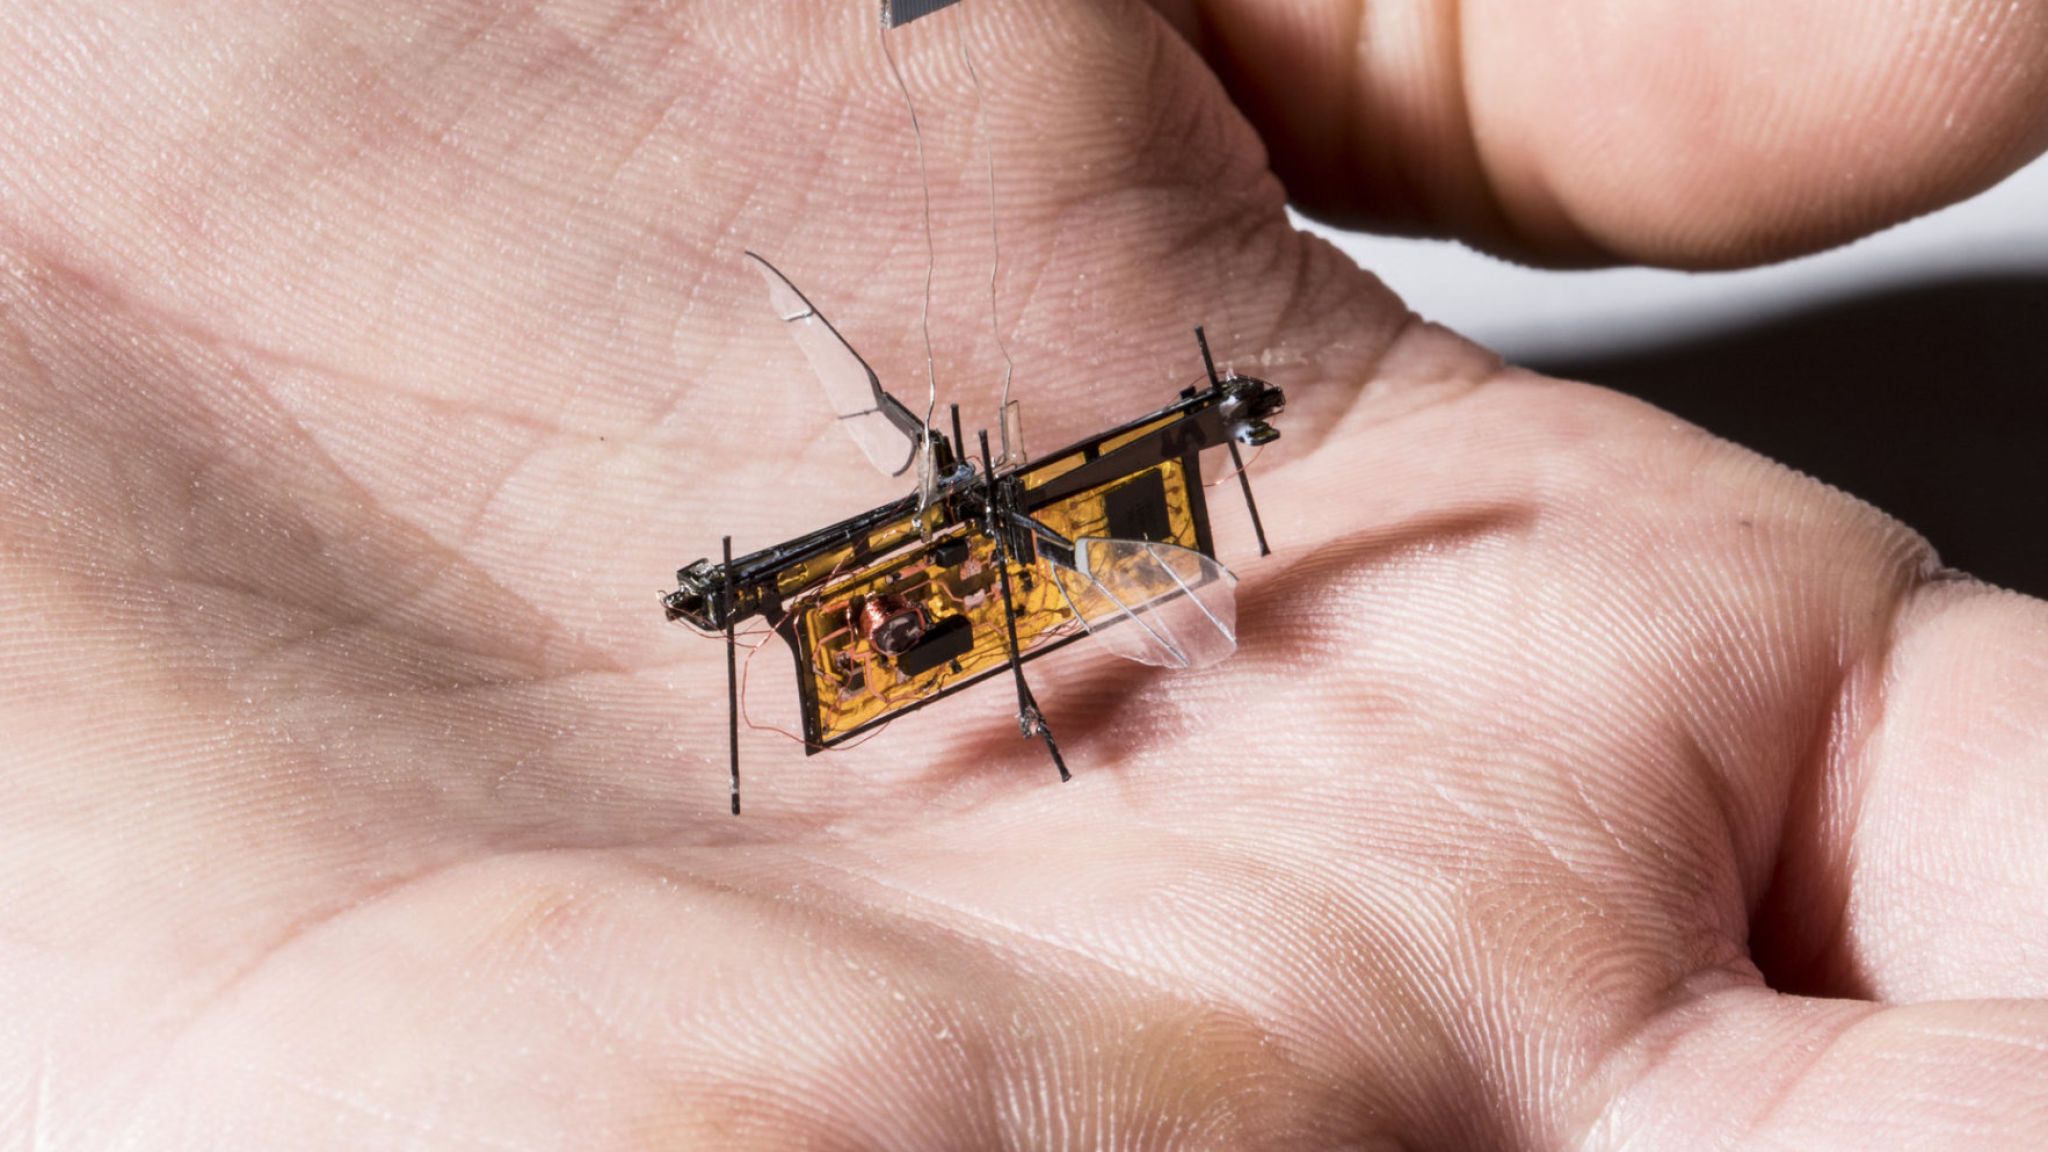 RoboFly-Insect-Sized-Robot-That-Can-Fly-Walk-And-Roam-On-Water-Surfaces